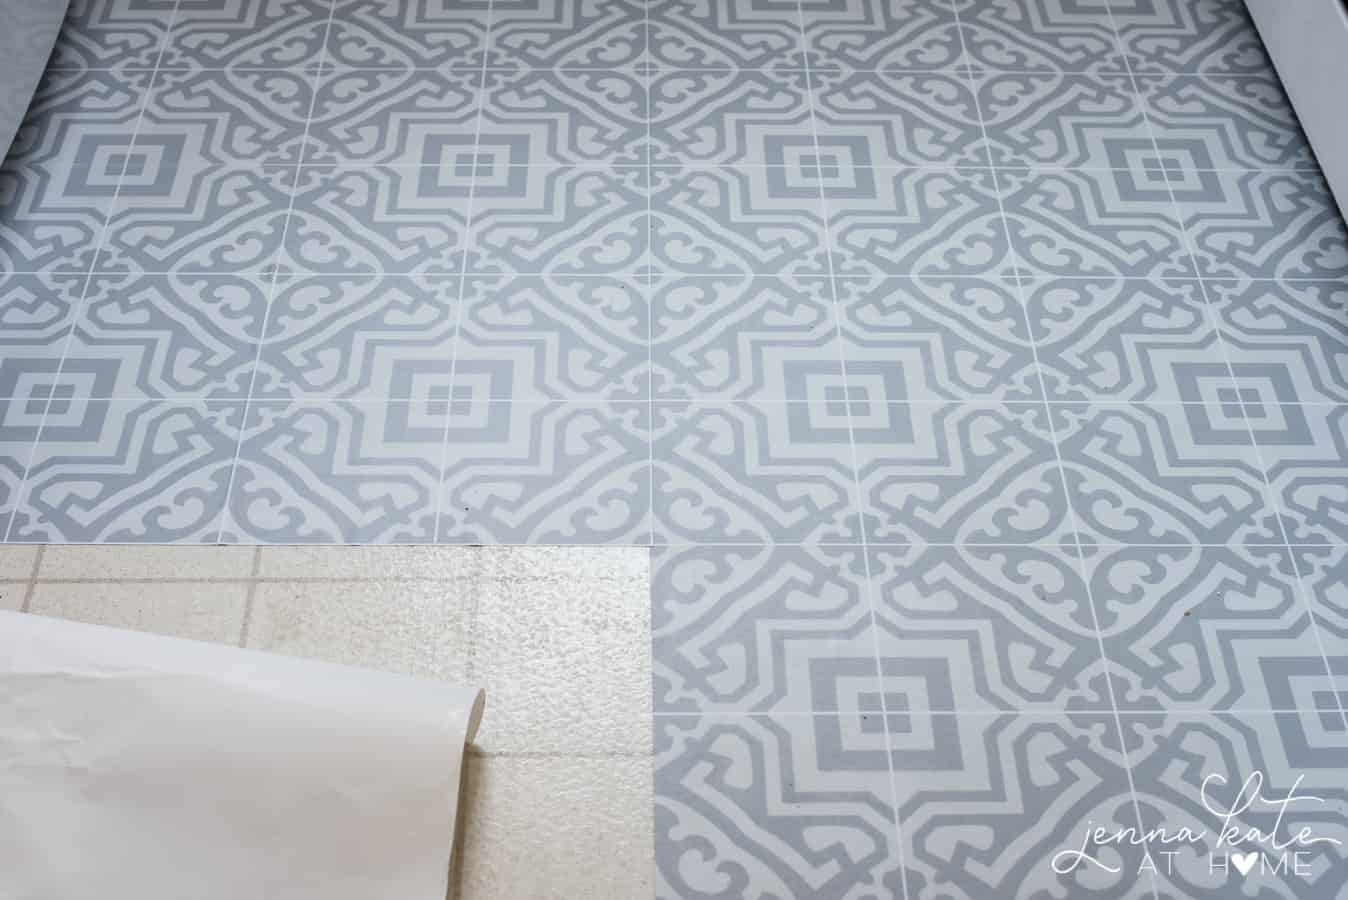 How to install vinyl floor stickers that are rated for kitchens and bathrooms